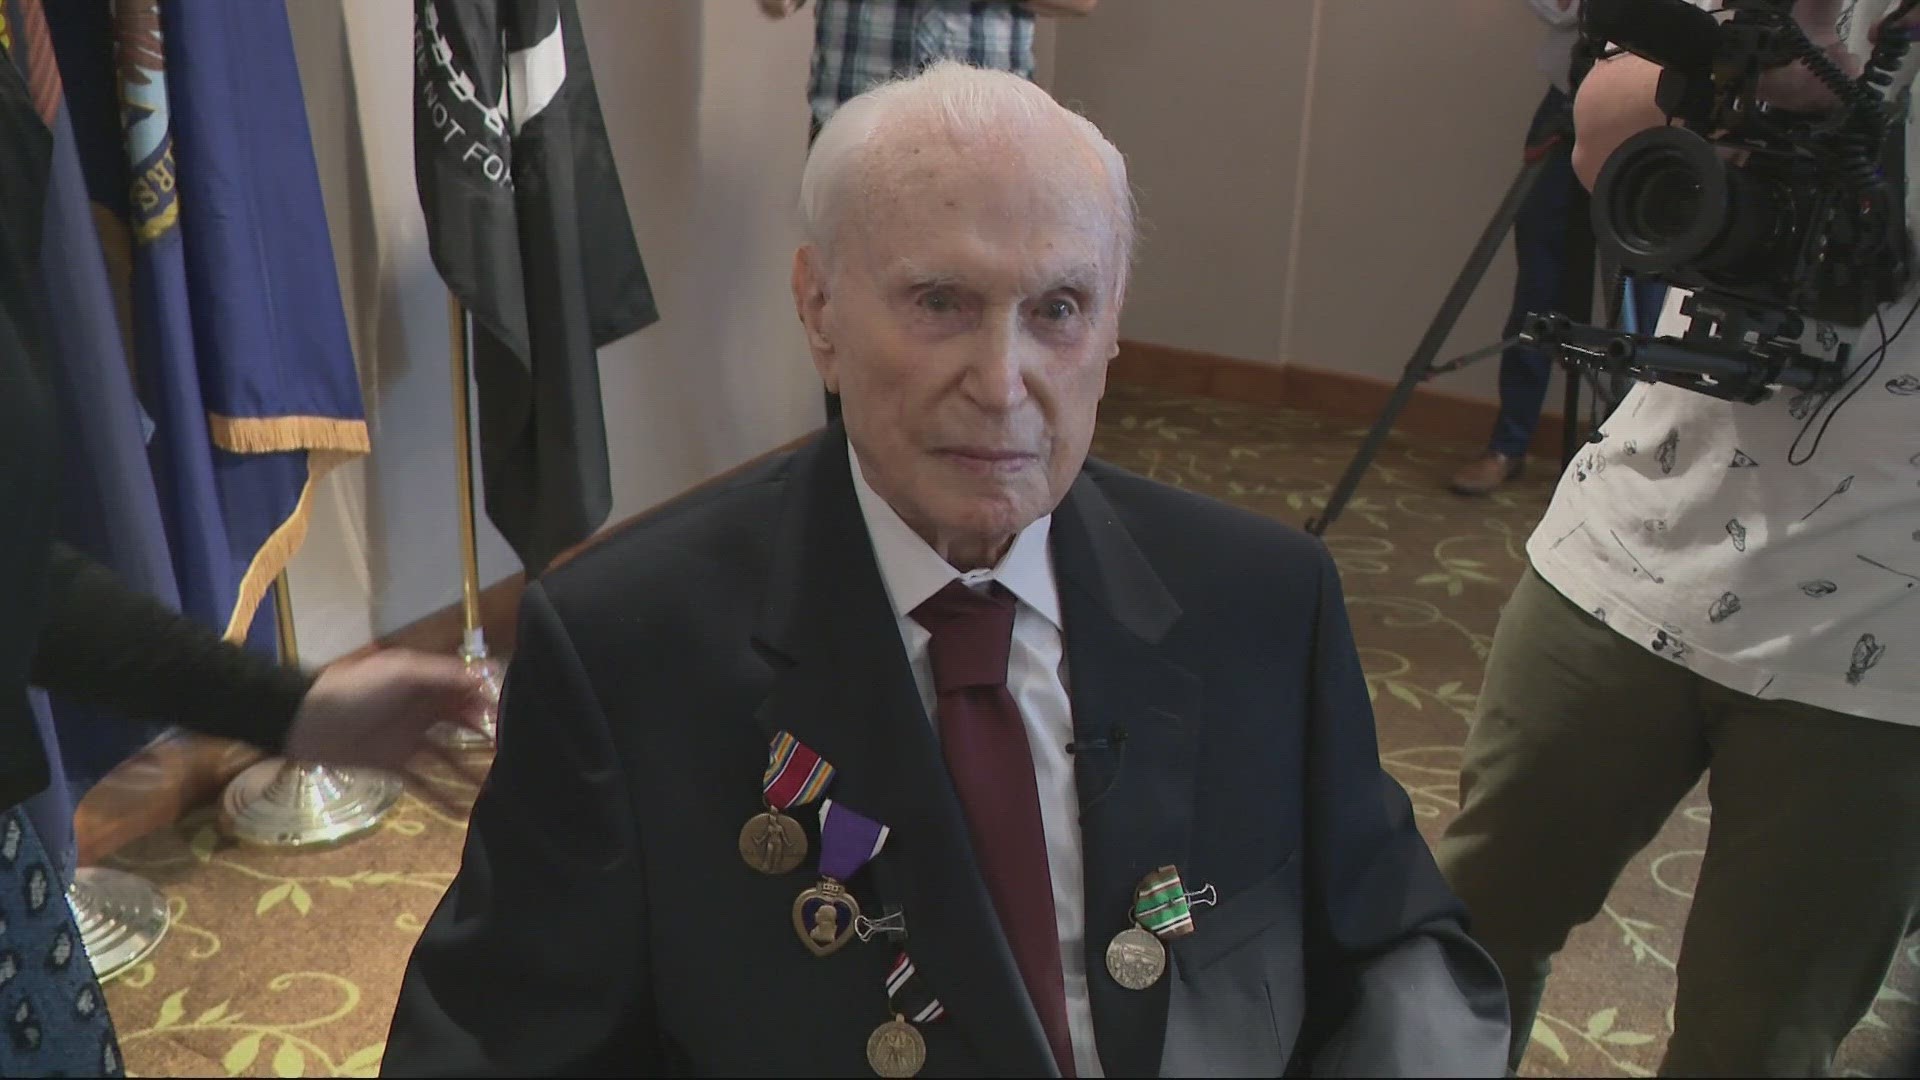 After more than a dozen missions, Lieutenant Champagne, a man who endured, survived and thrived, received his long overdue purple heart.